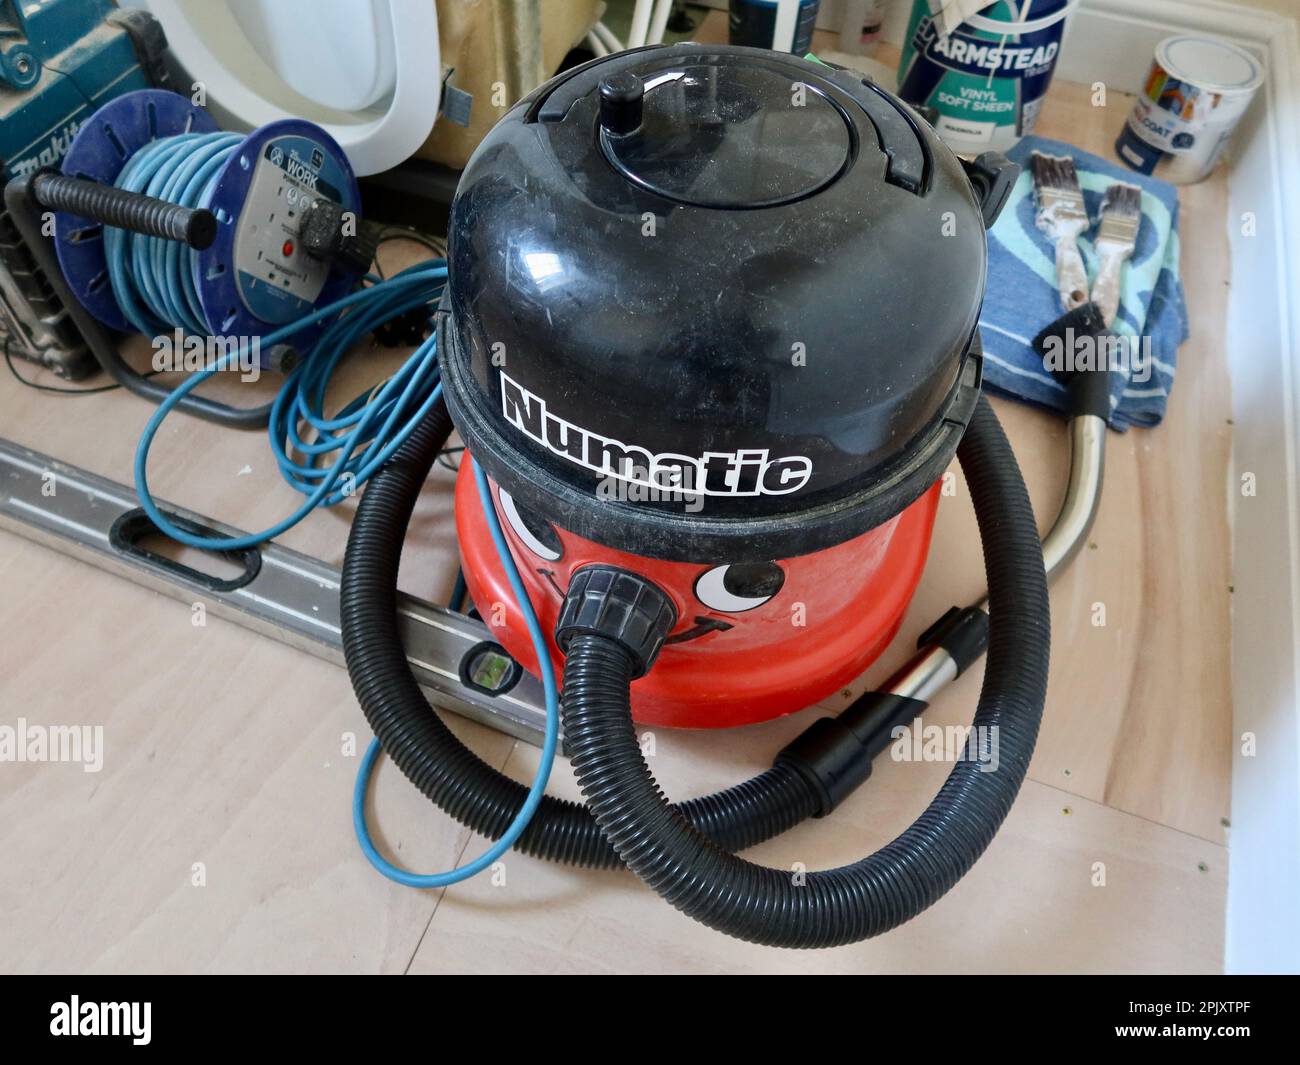 Suffolk, UK - 4 April 2023 : Numatic Henry Hoover vacuum cleaner dusty from use. Stock Photo